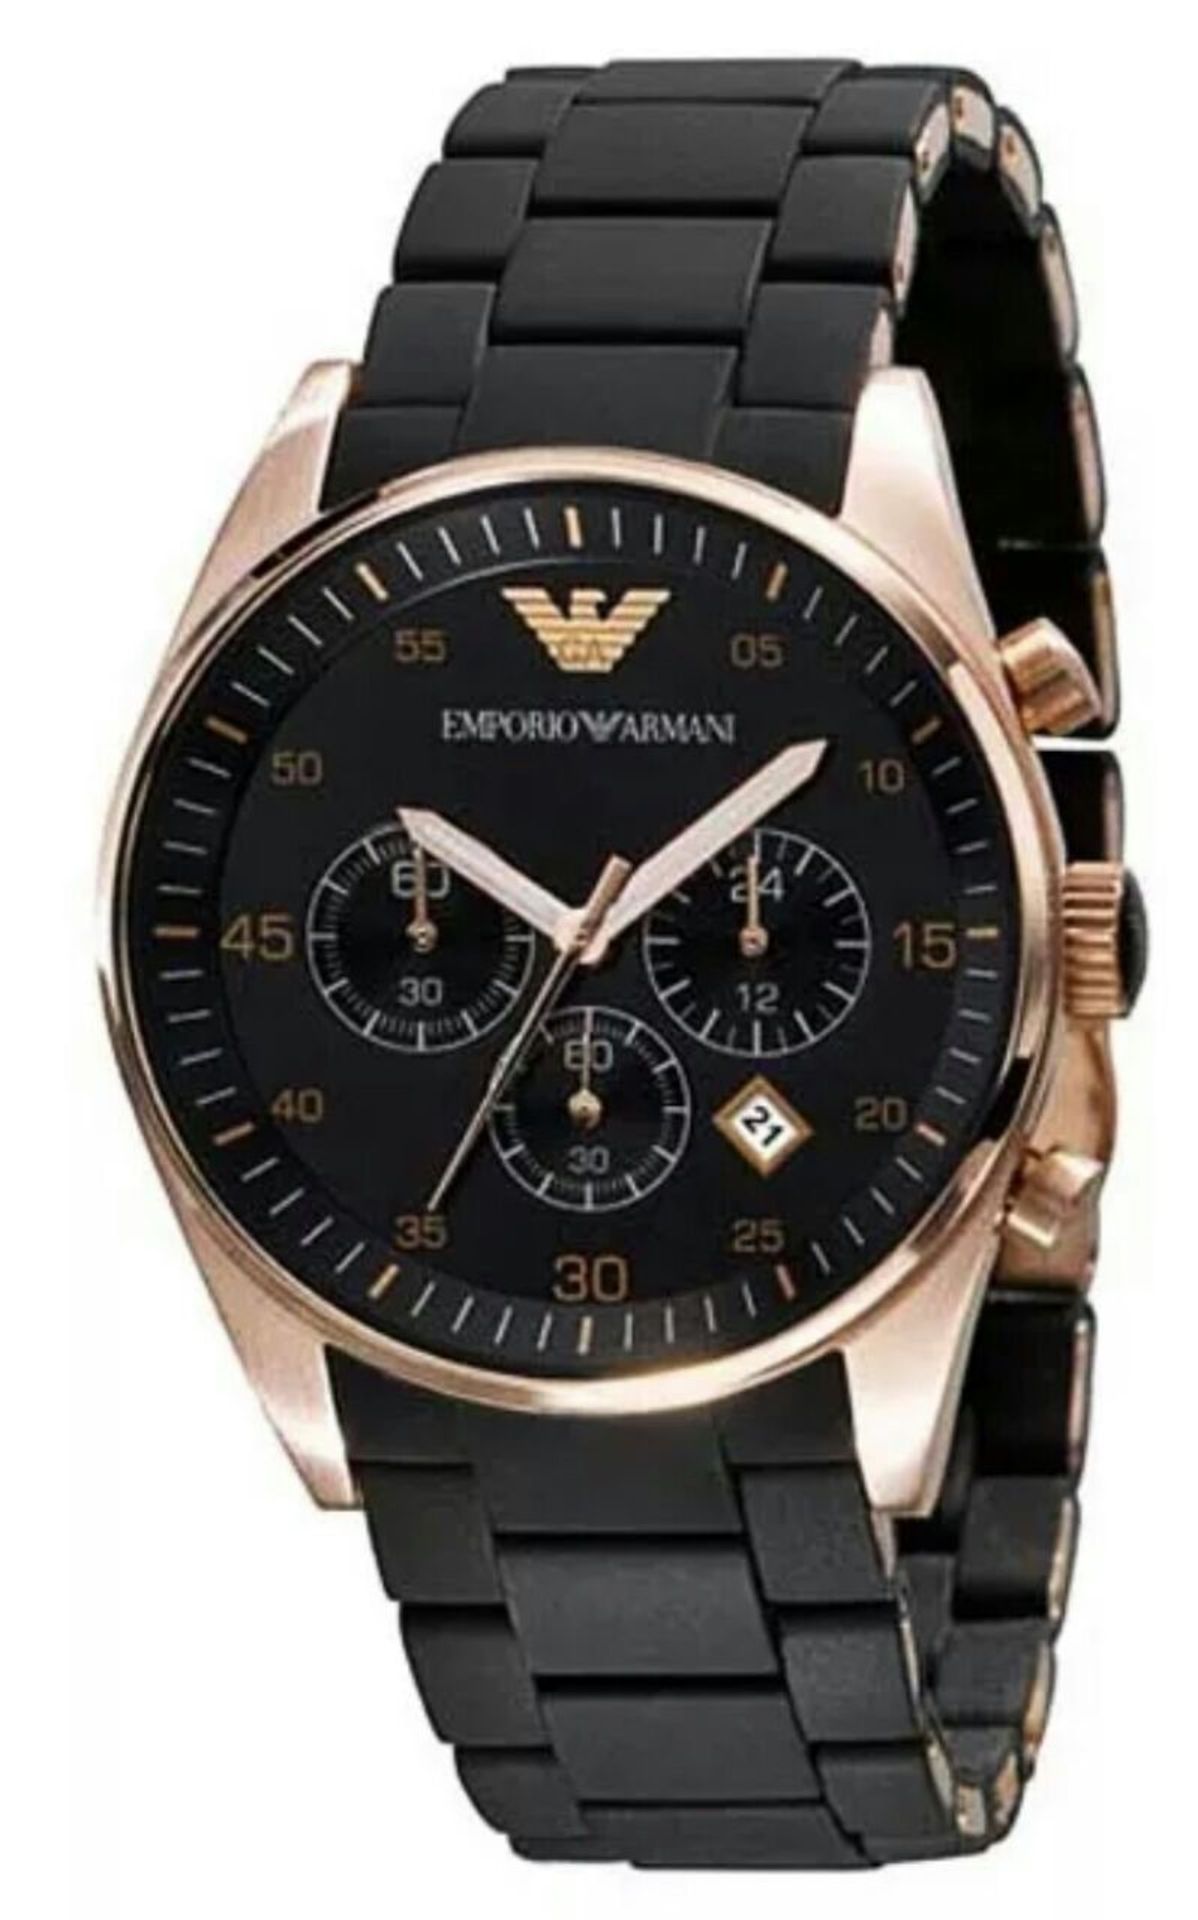 10 X BRAND NEW EMPORIO ARMANI DESIGNER WATCHES, COMPLETE WITH ORIGINAL ARMANI WATCH BOXES, MANUALS & - Image 10 of 10